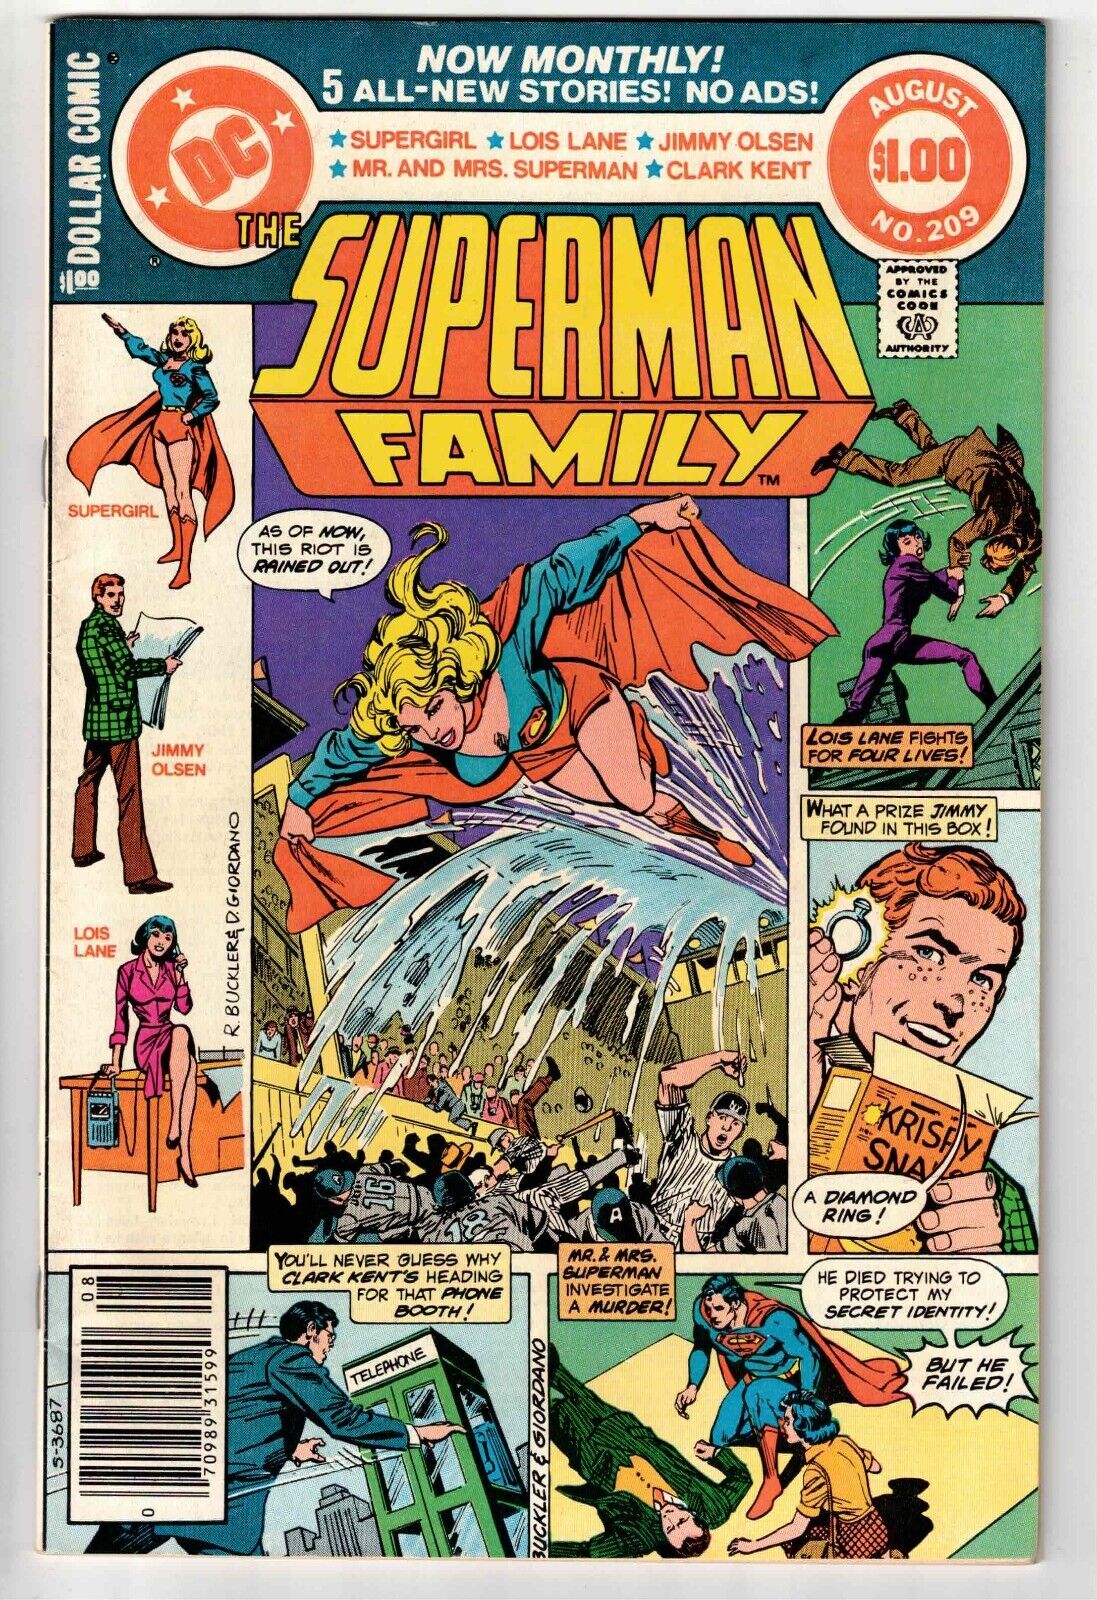 THE SUPERMAN FAMILY #209 1981 BRONZE AGE GIANT 52 PAGES FN/VFN